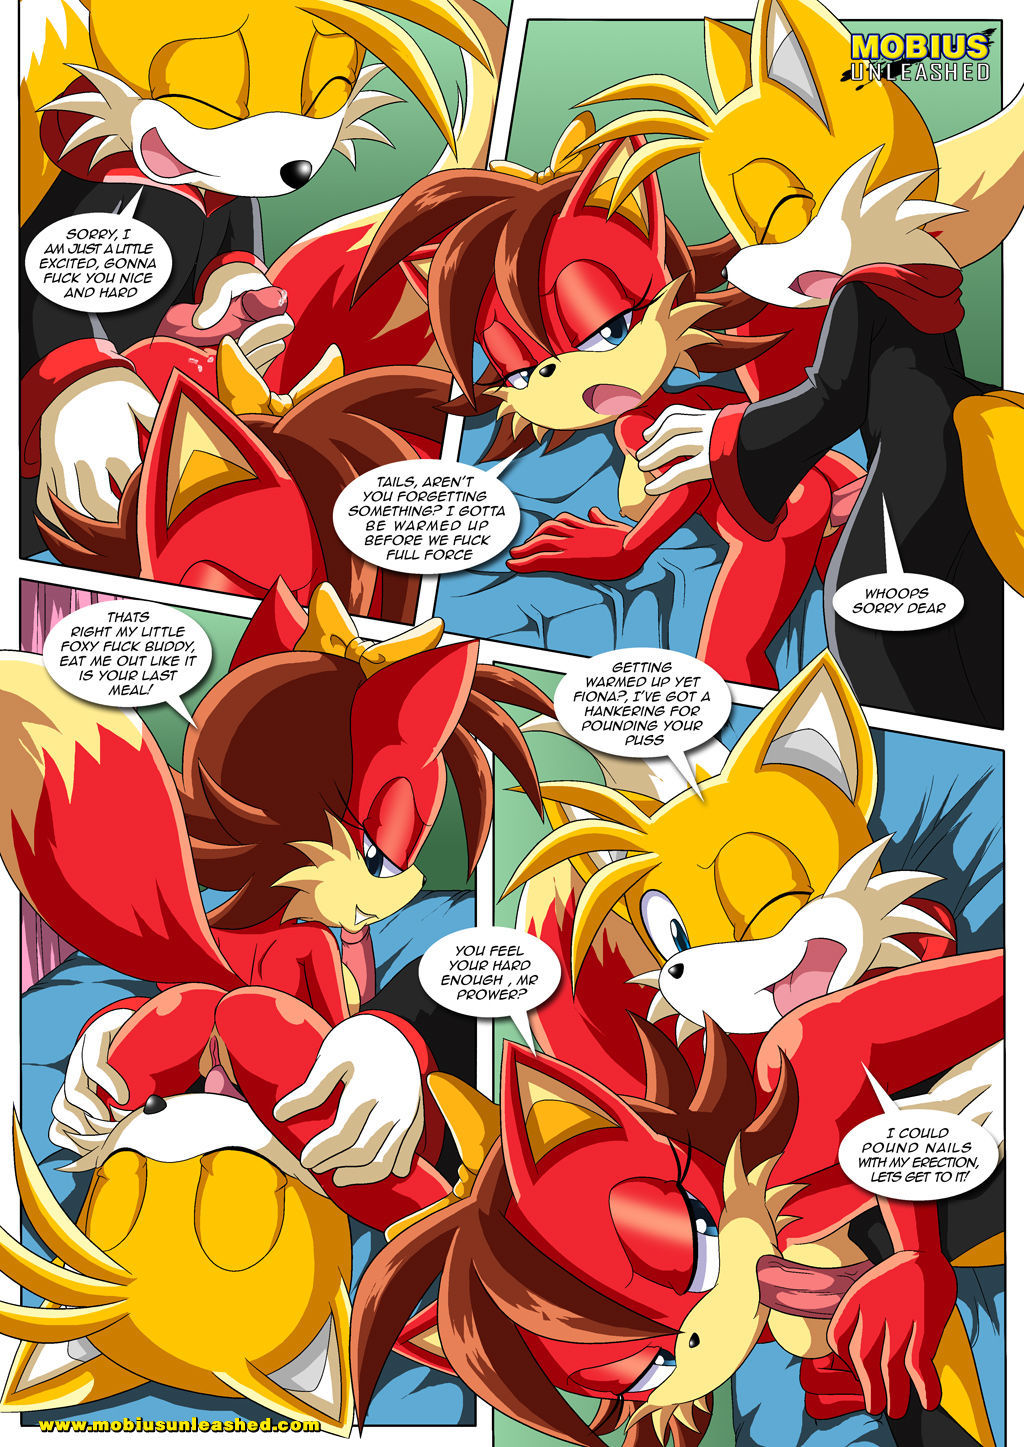 The Prower Family Affair (Sonic The Hedgehog) by Palcomix page 3